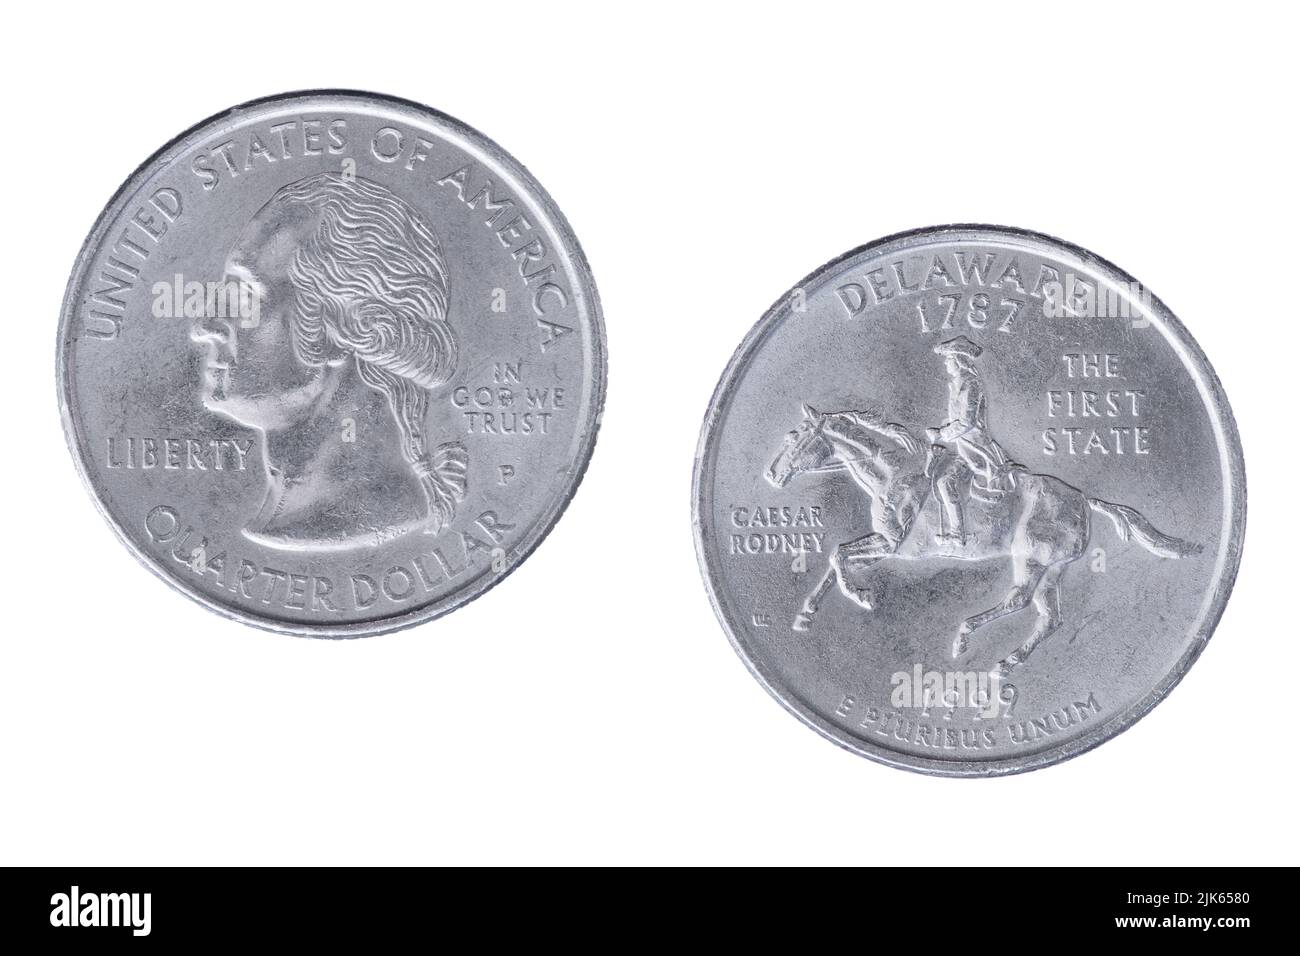 Obverse and reverse sides of the Delaware 1999P State Commemorative Quarter isolated on a white background Stock Photo